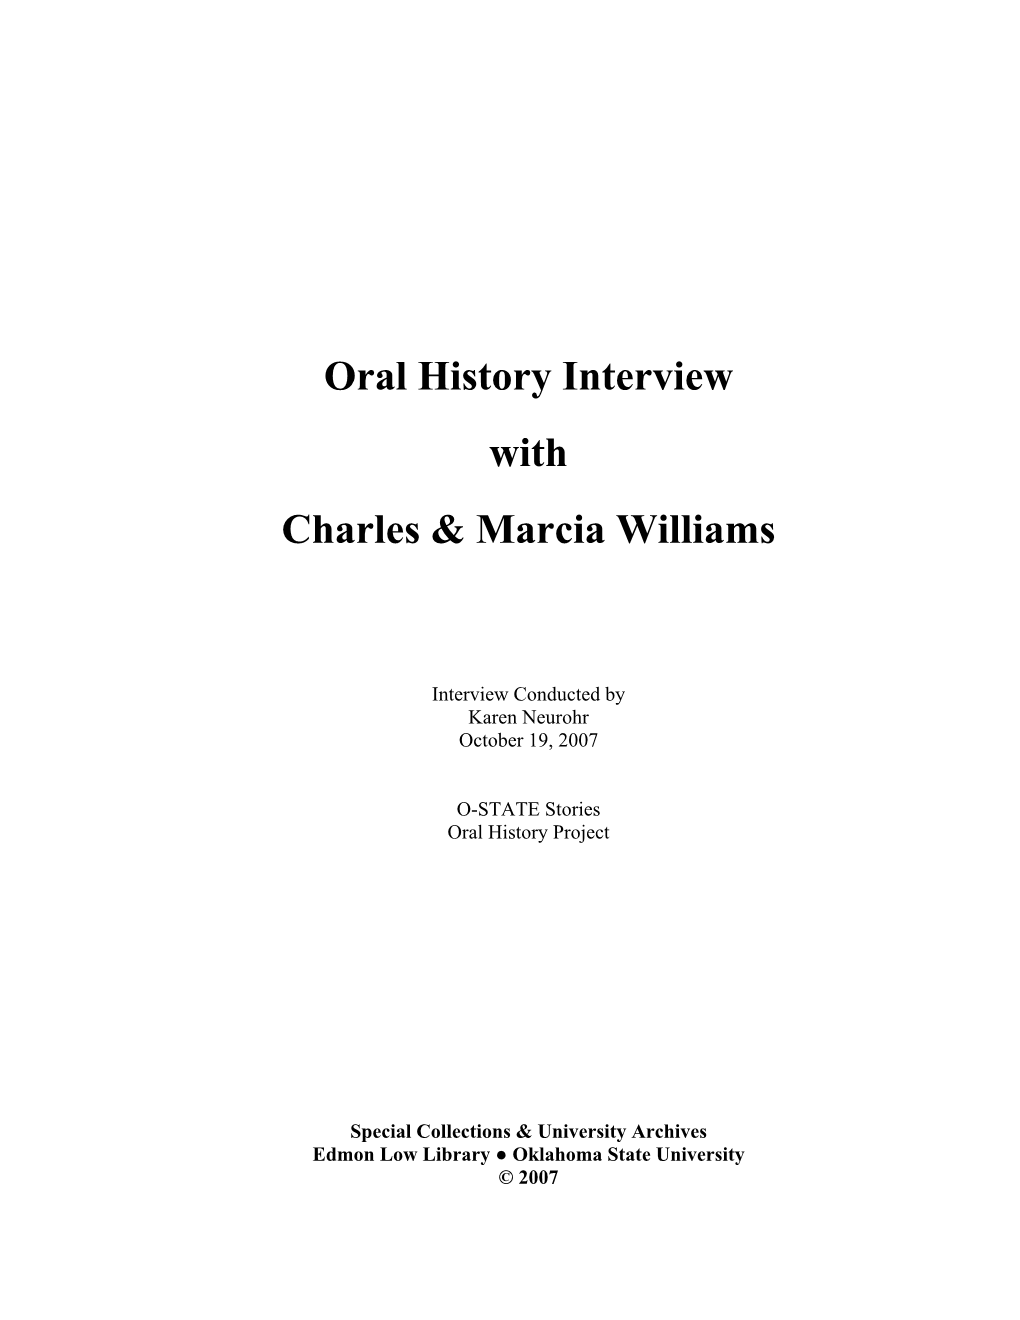 Oral History Interview with Charles & Marcia Williams